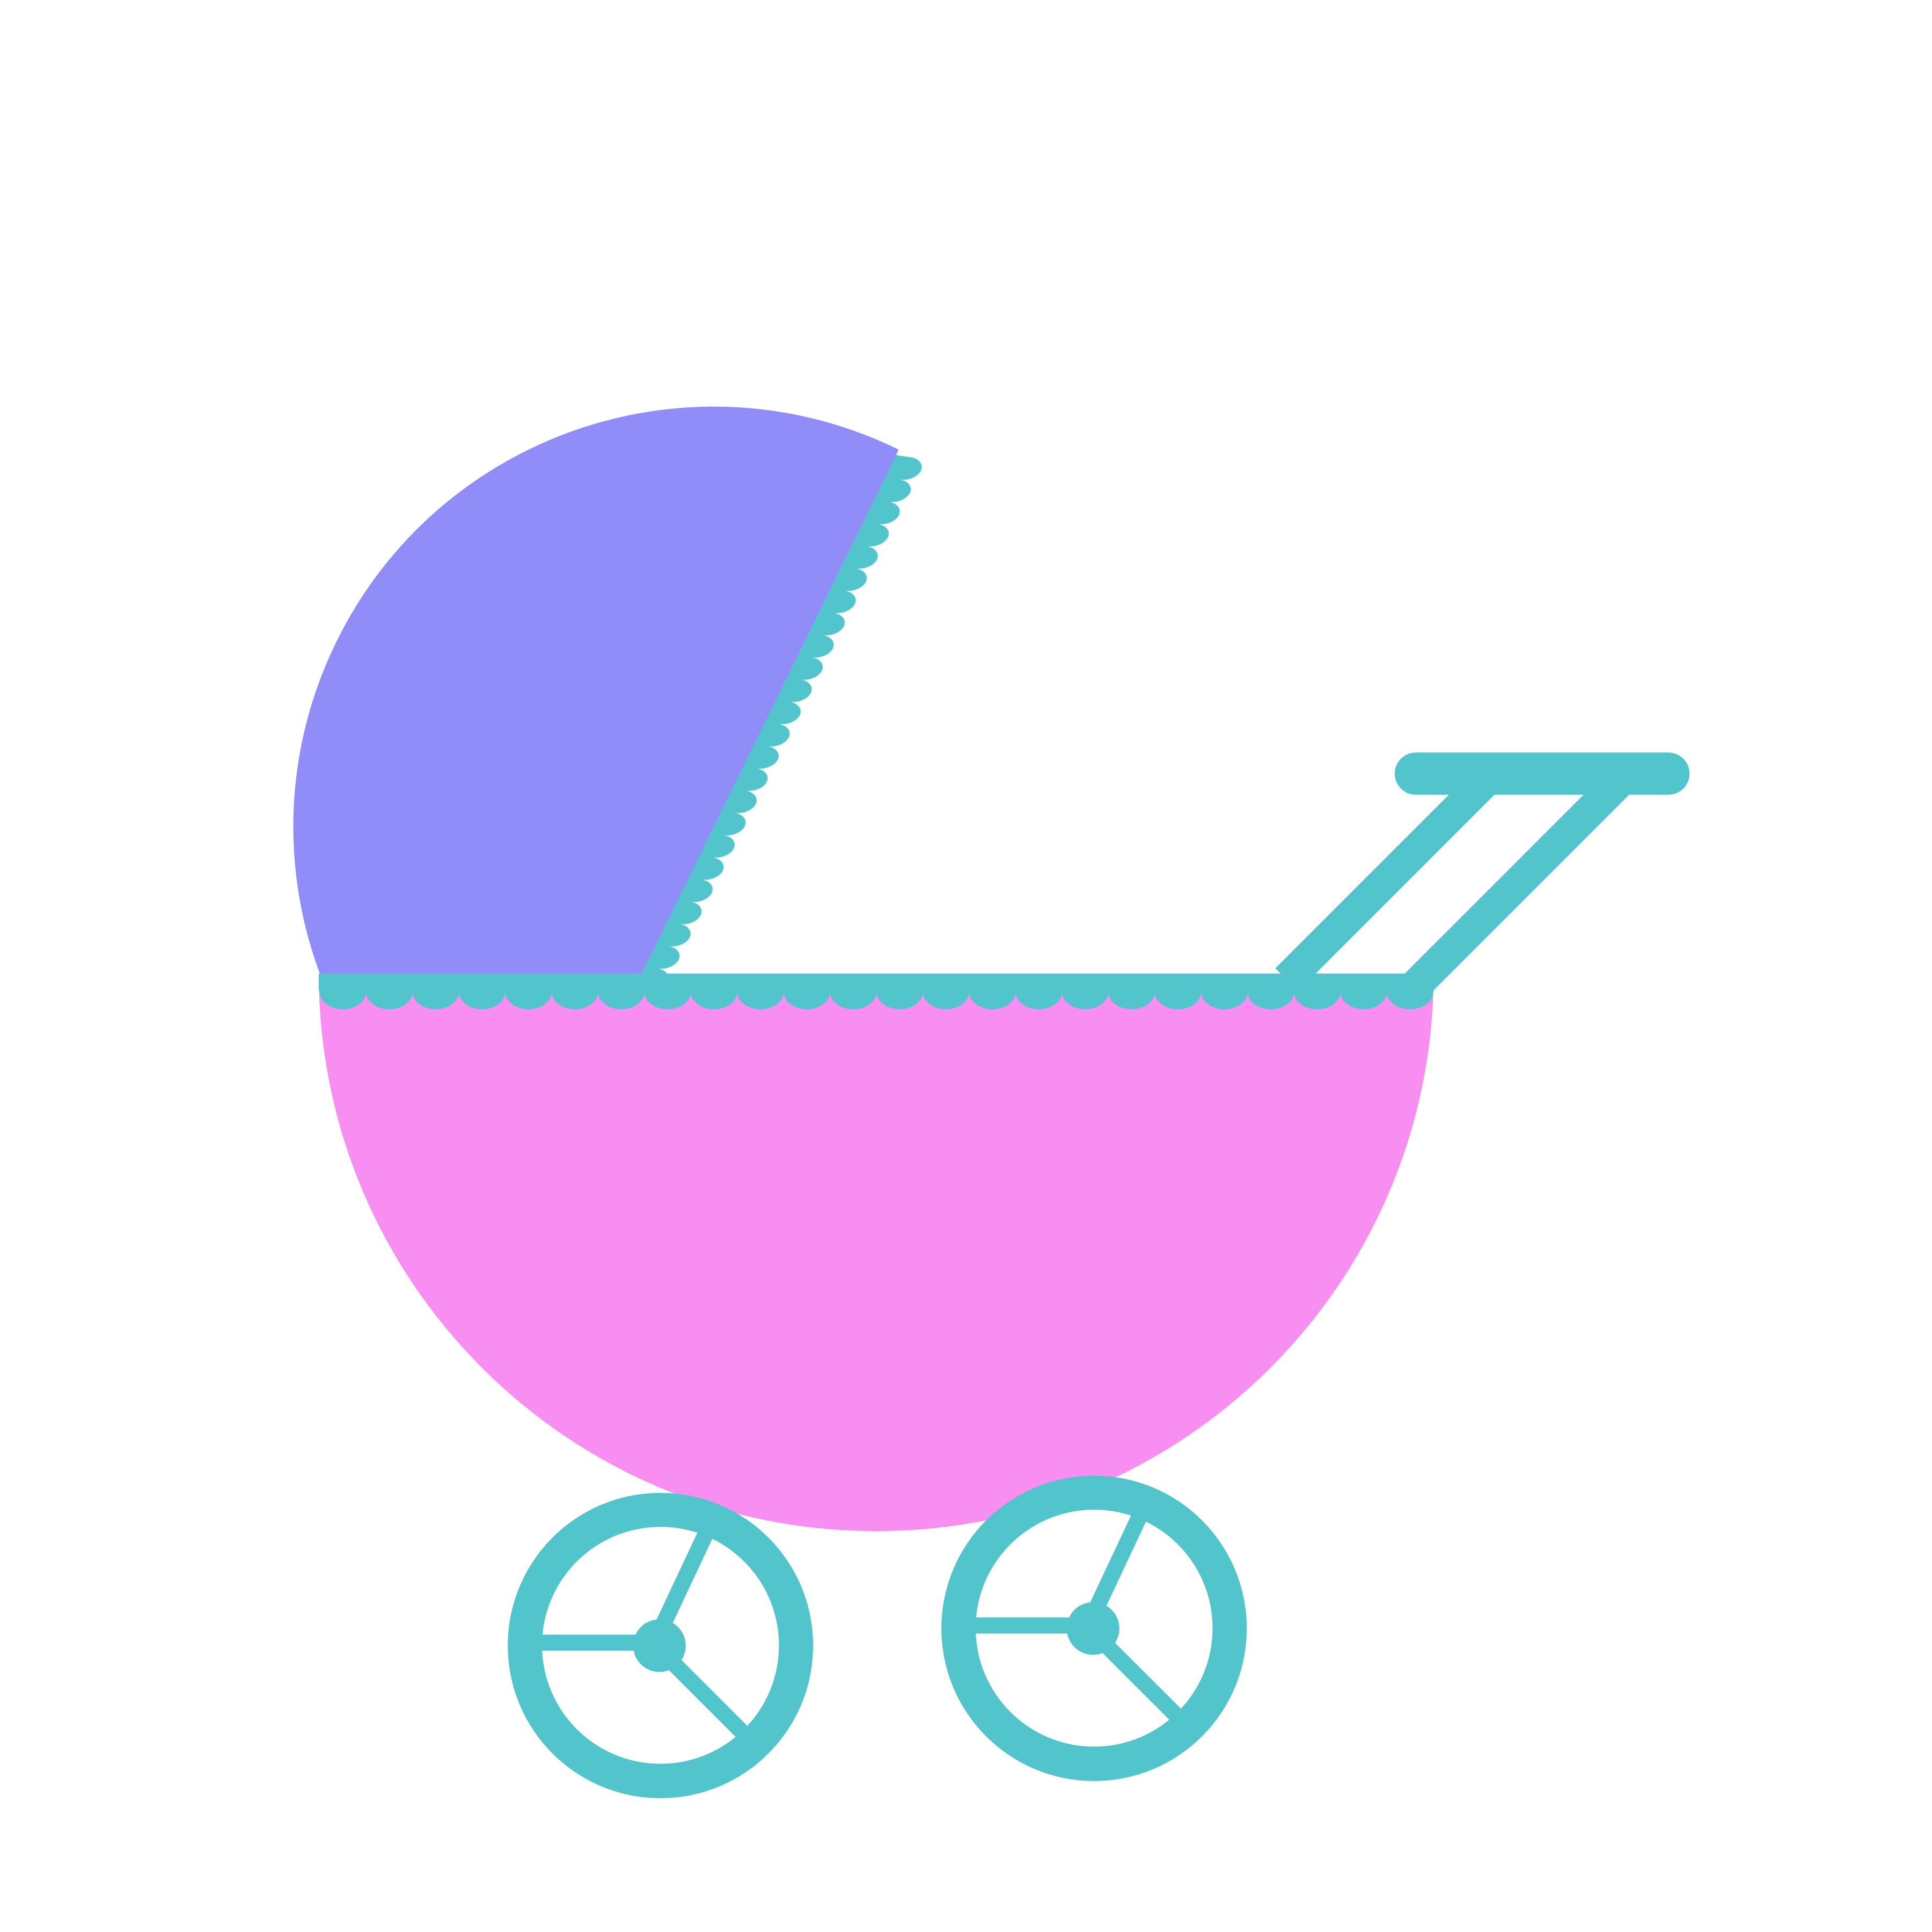 baby shower clipart cute